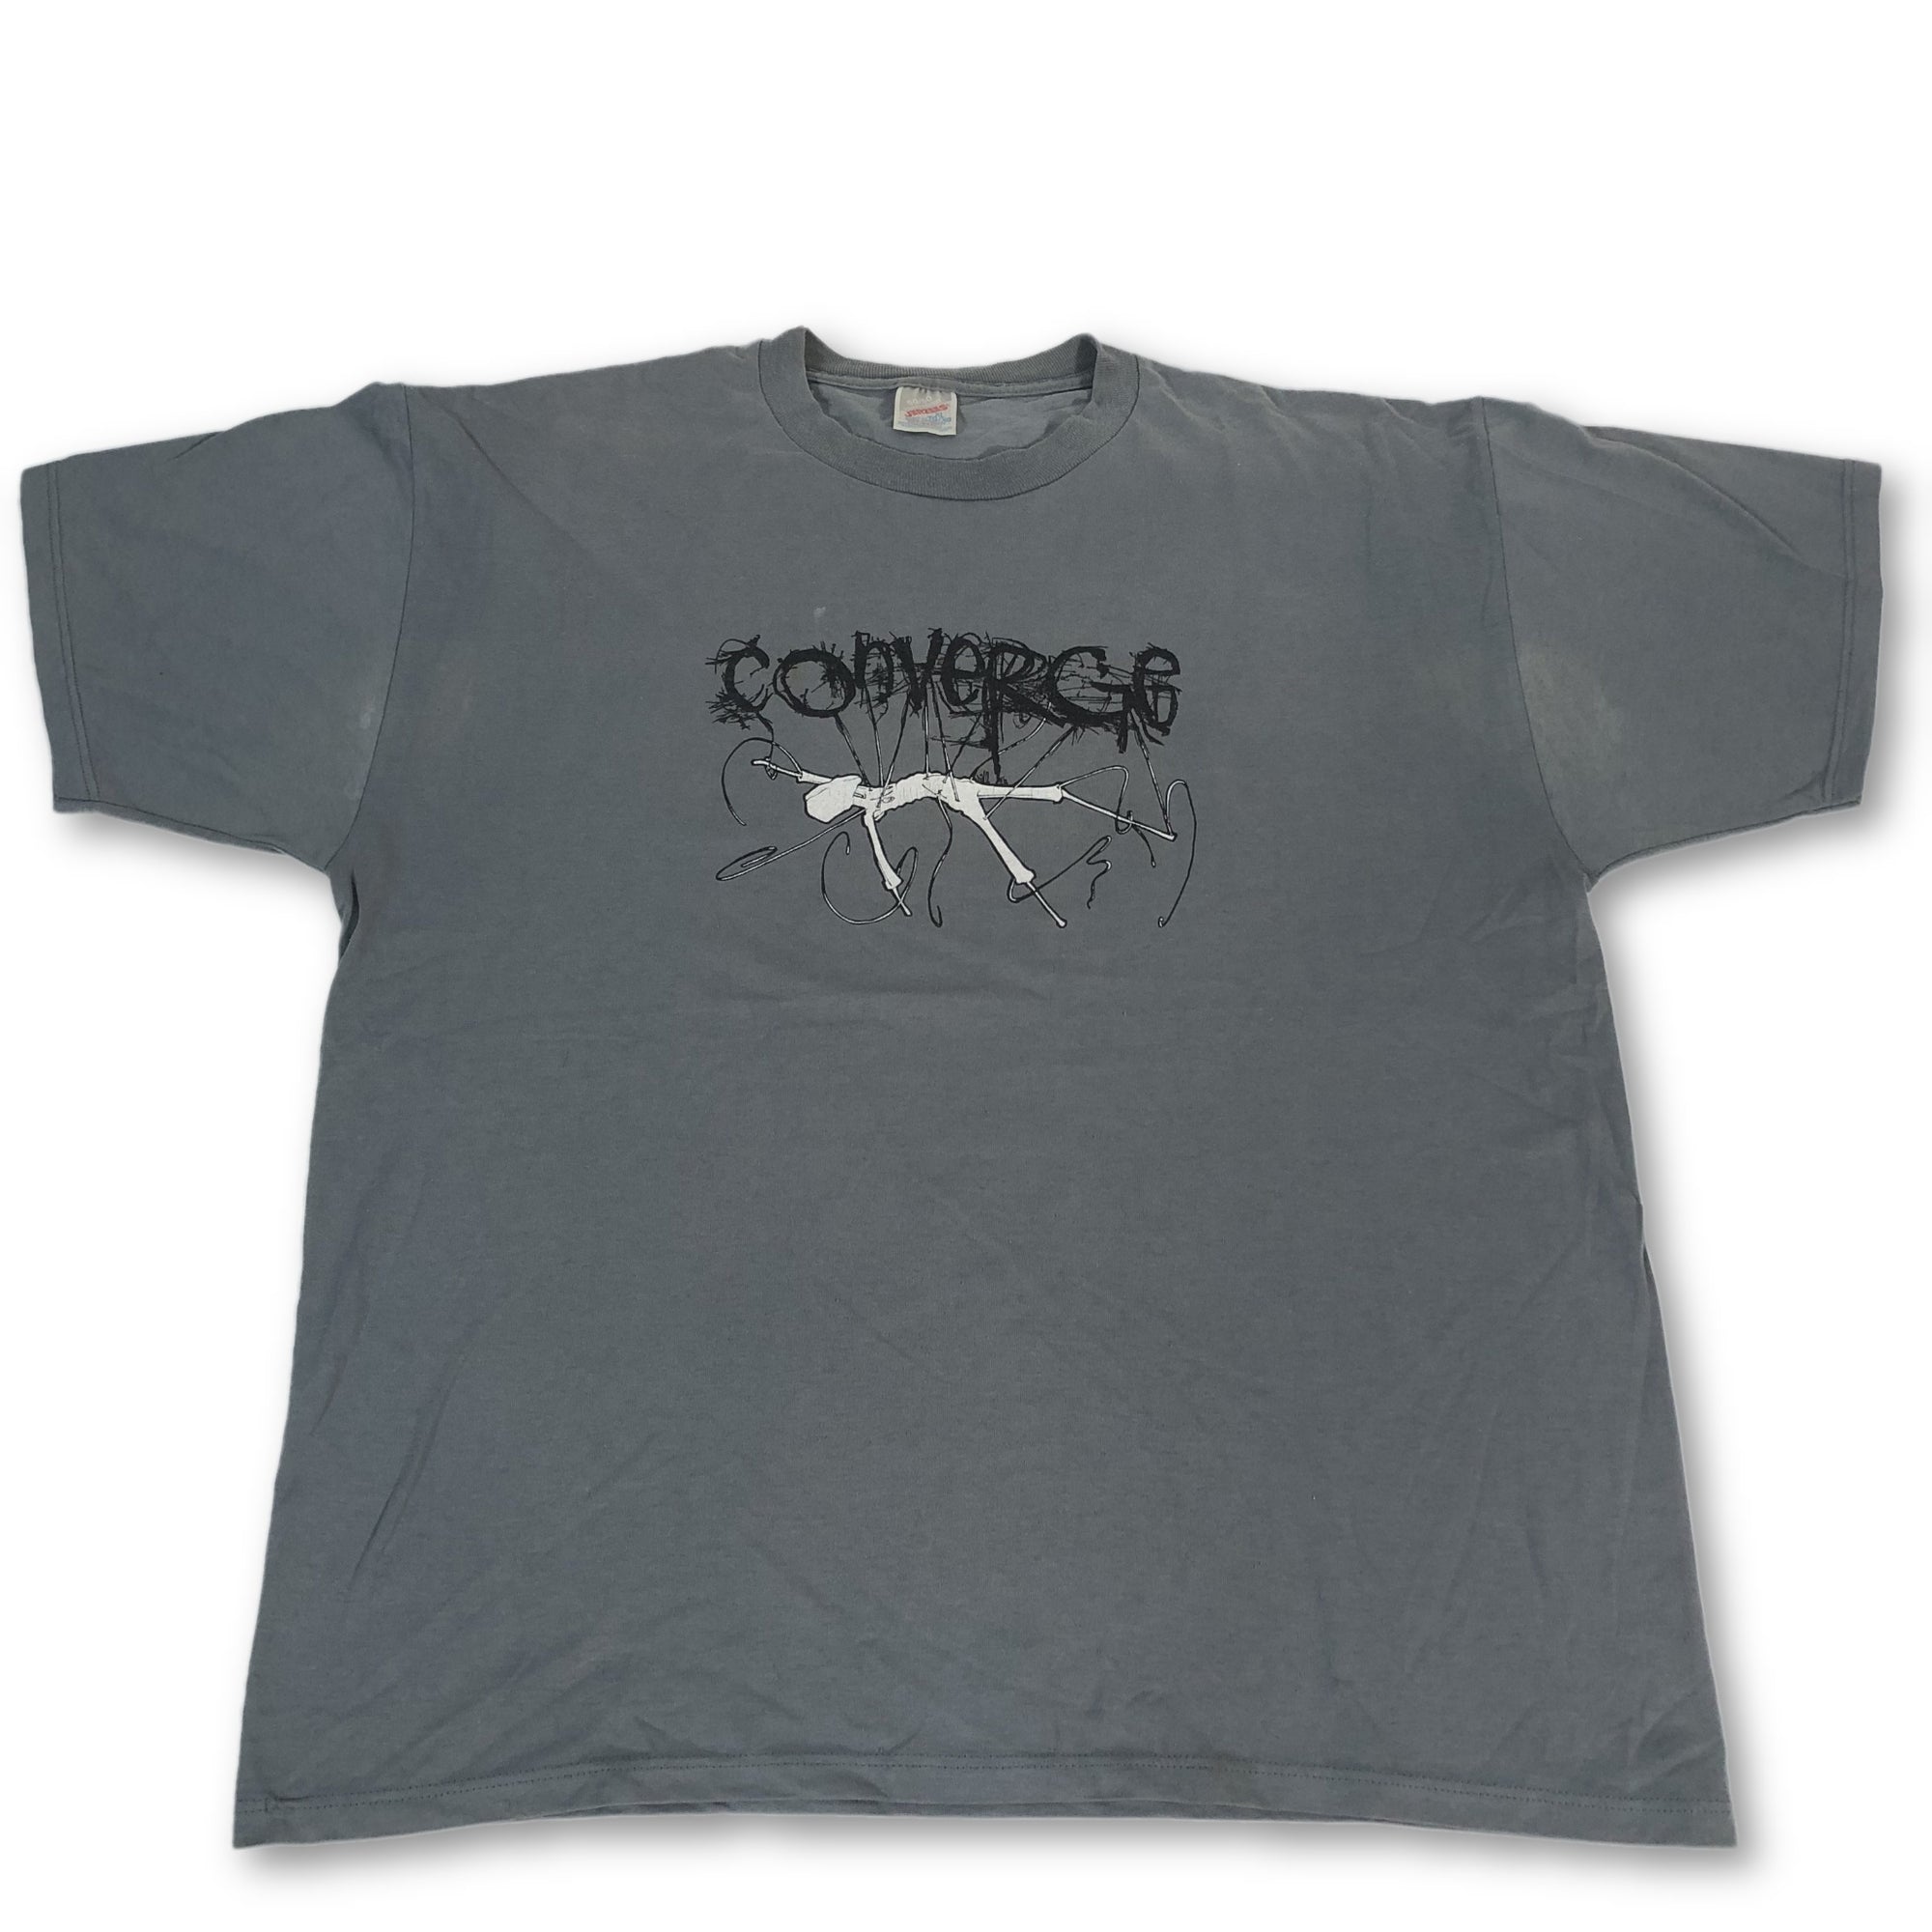 Vintage Converge "Petitioning The Empty Sky" T-Shirt - jointcustodydc